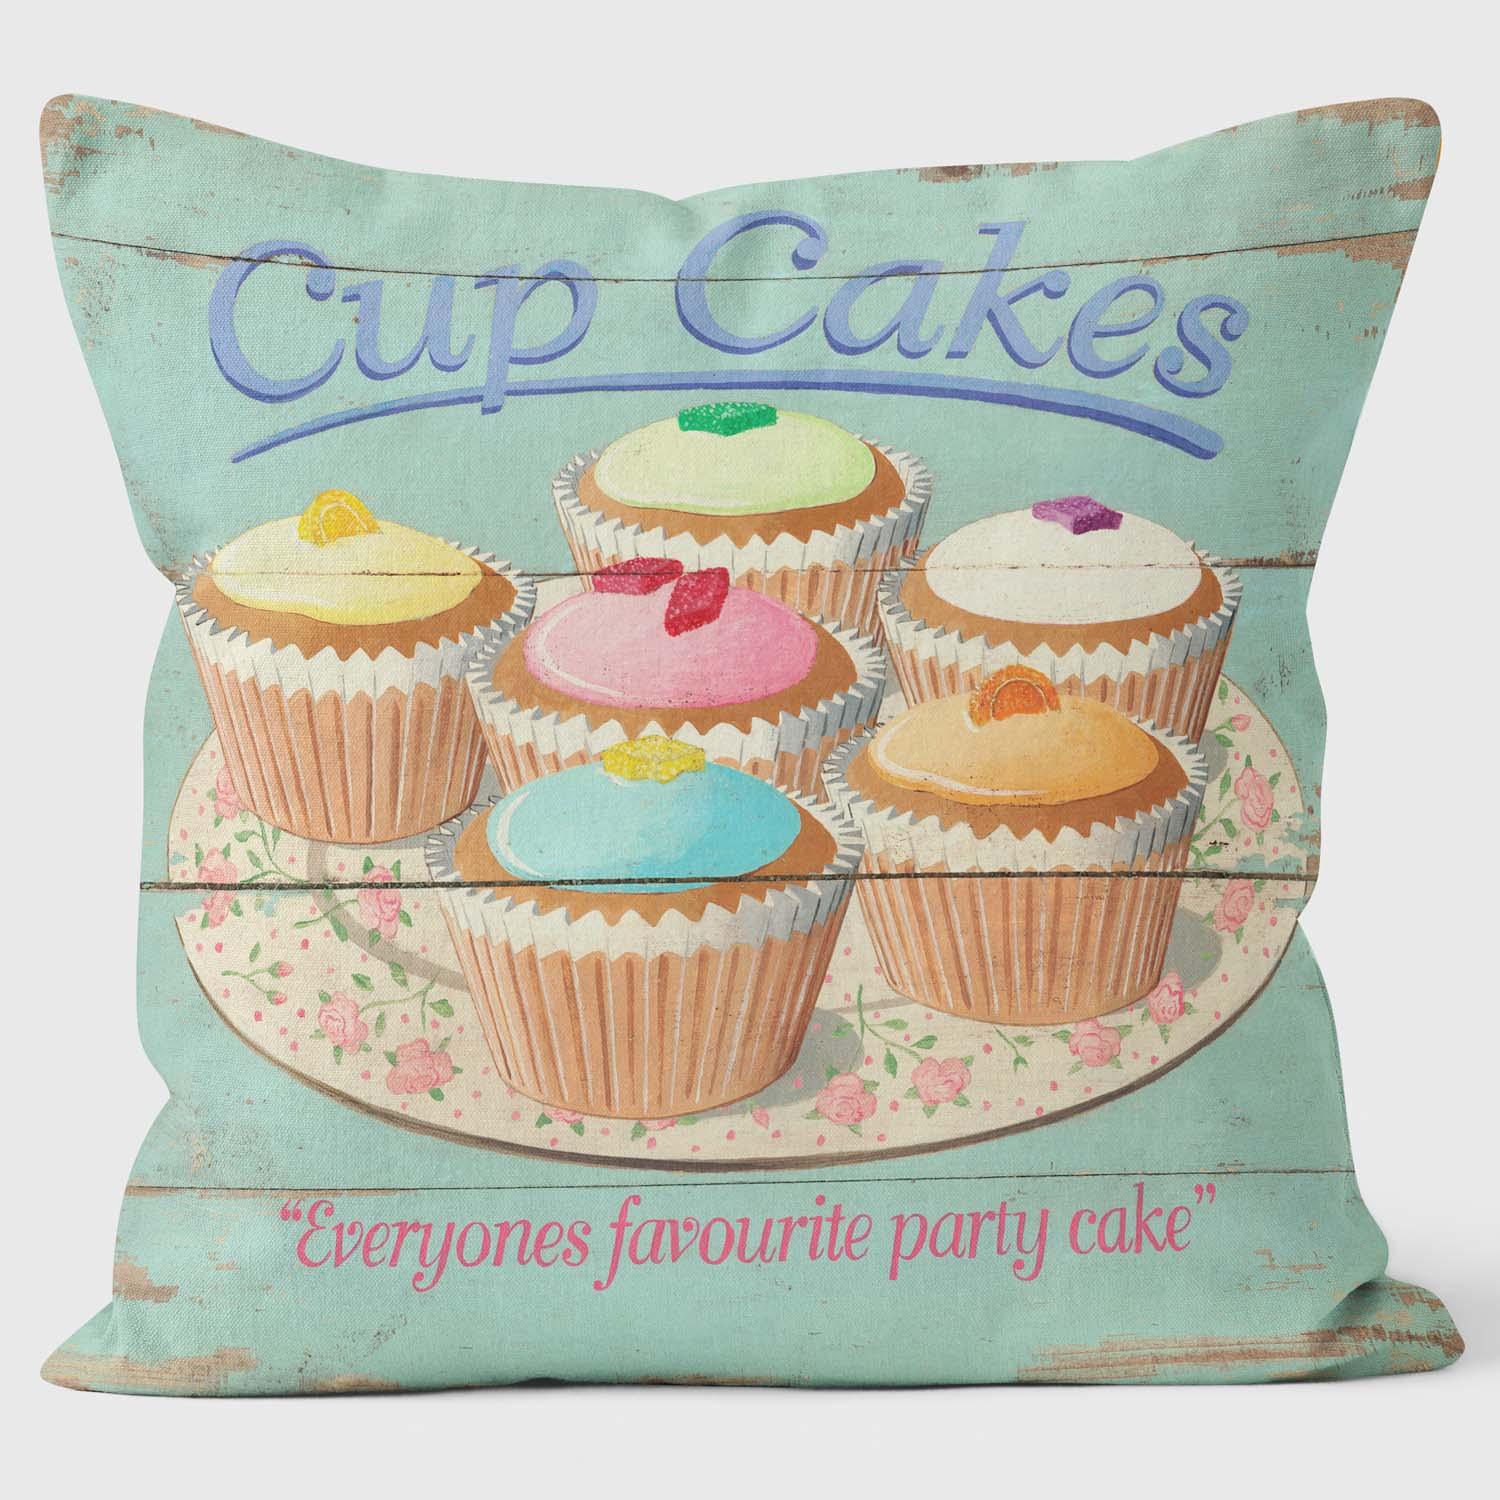 Cup Cakes Party Cakes - Martin Wiscombe Cushion - Handmade Cushions UK - WeLoveCushions